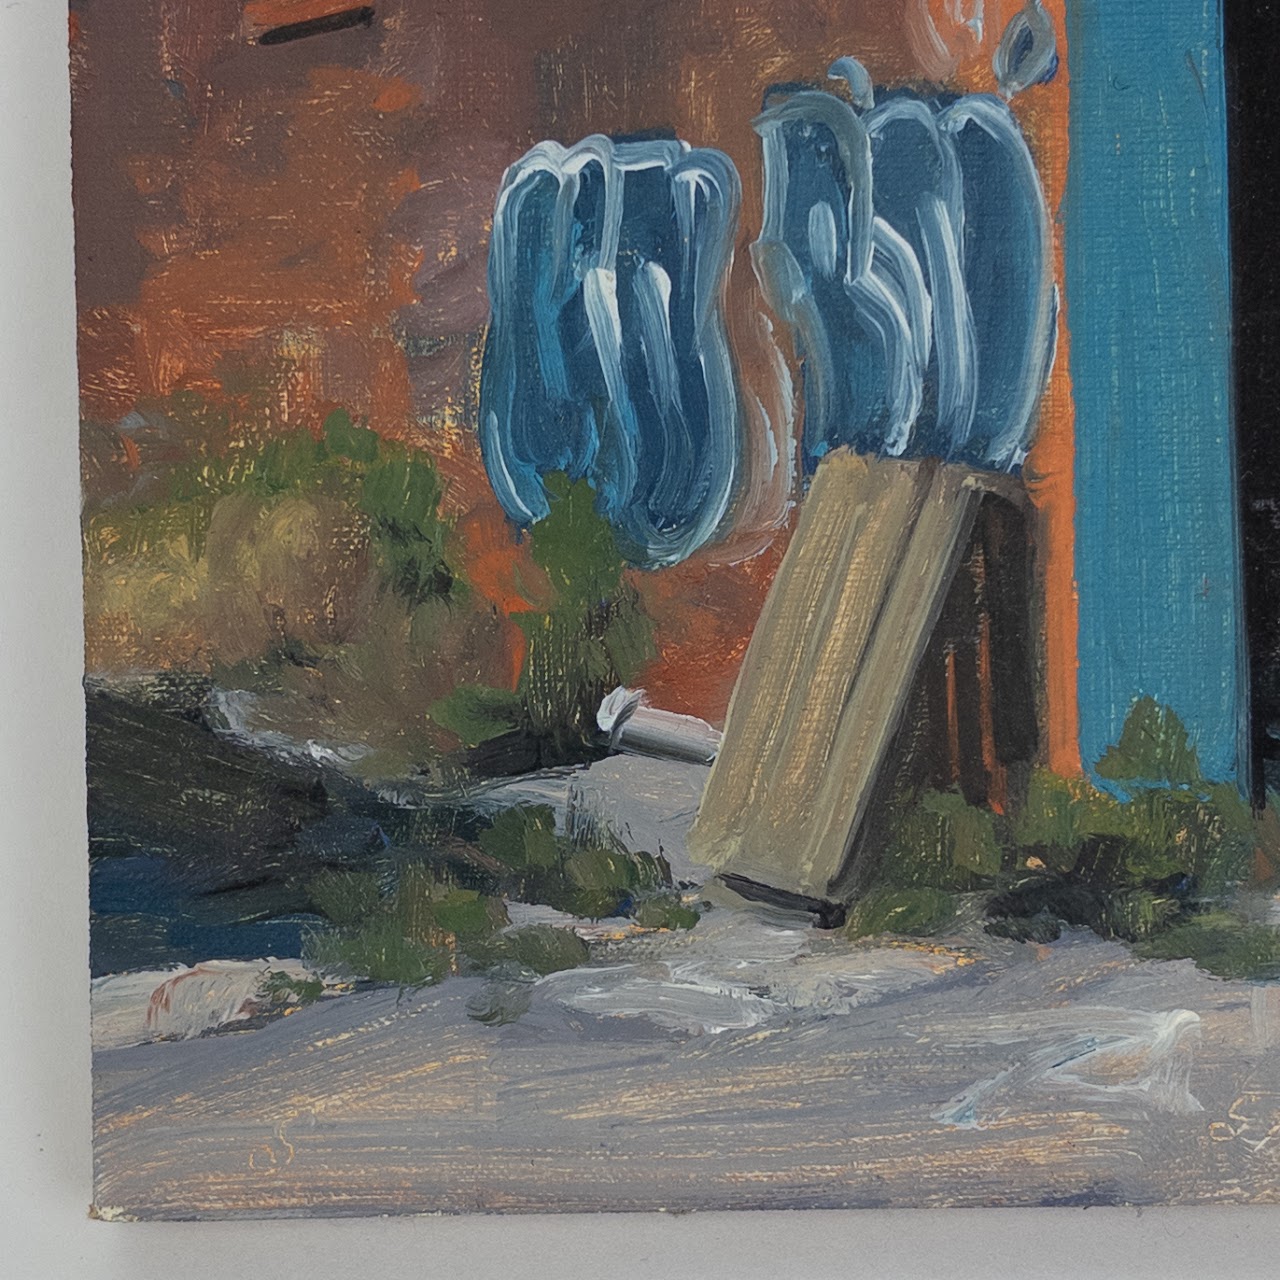 Stephen Magsig "Eastern Market Blue" Small Painting